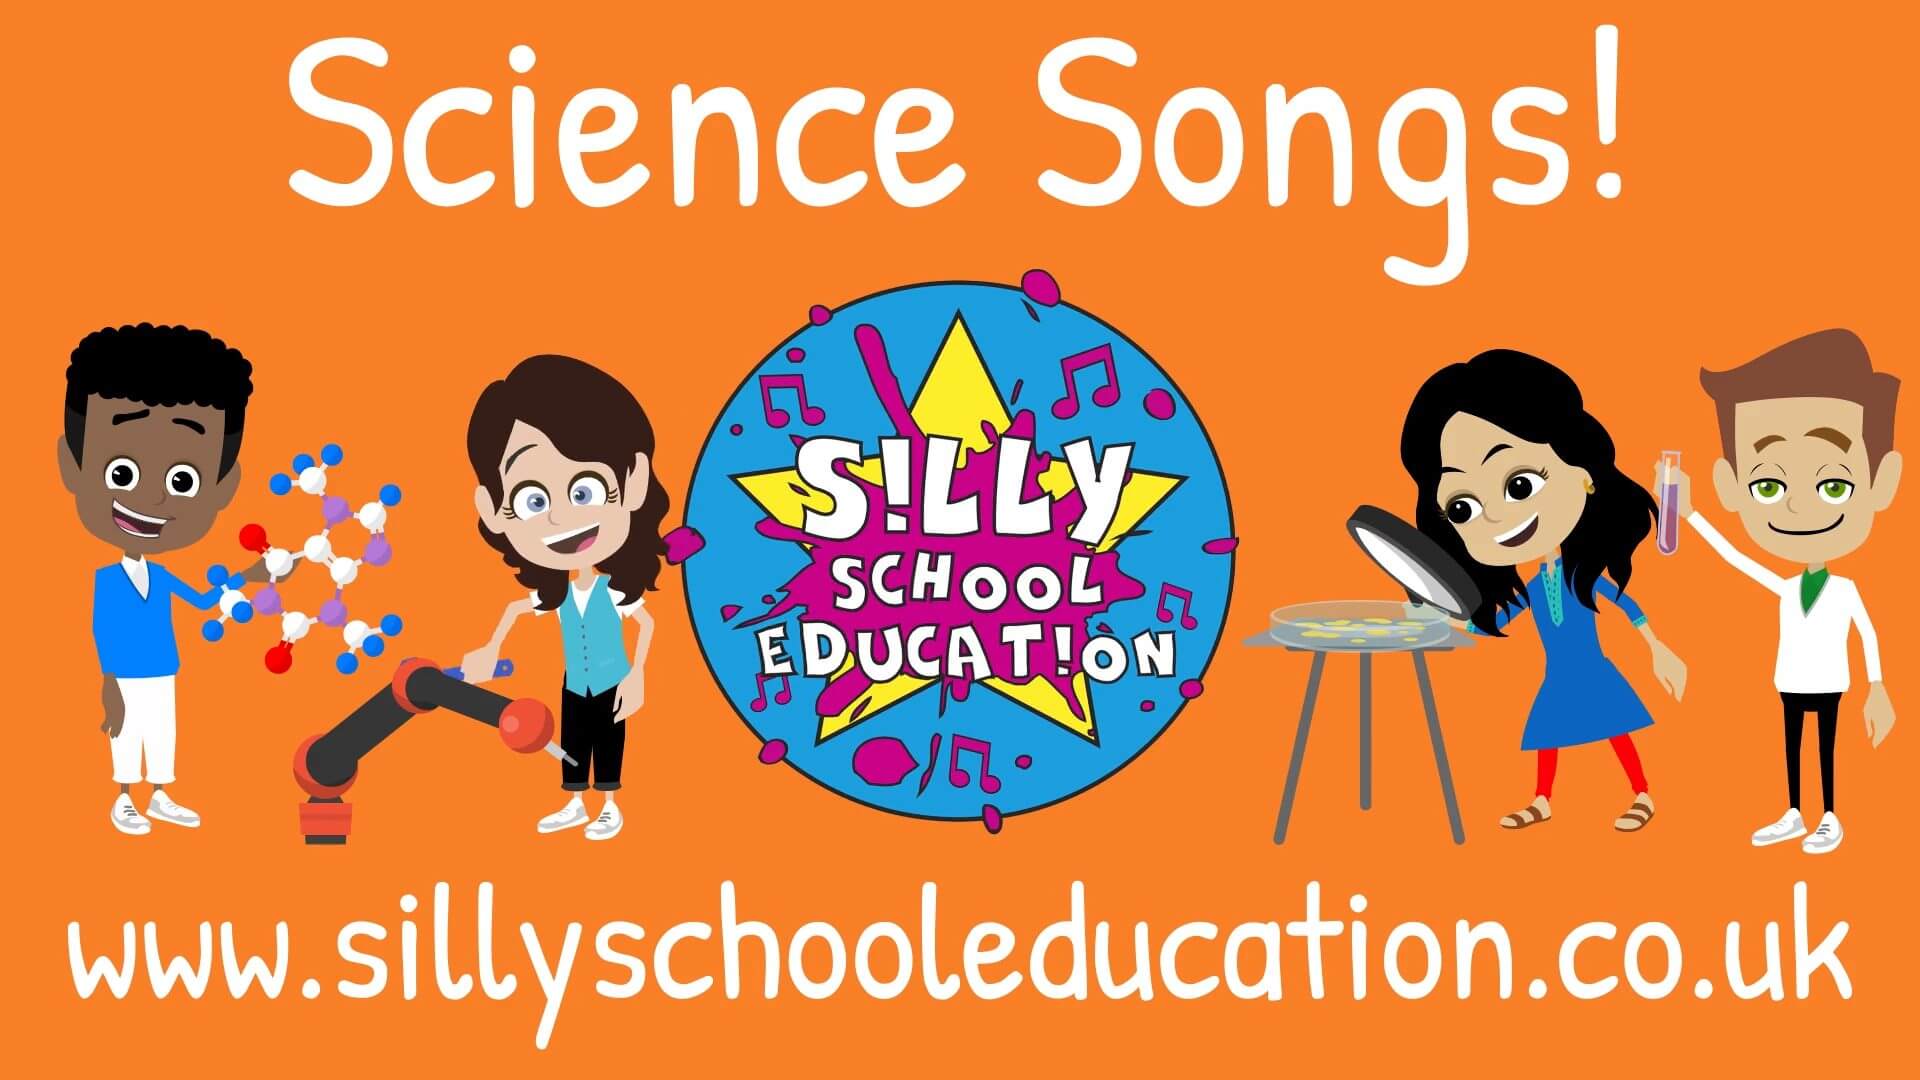 Science Songs for Schools